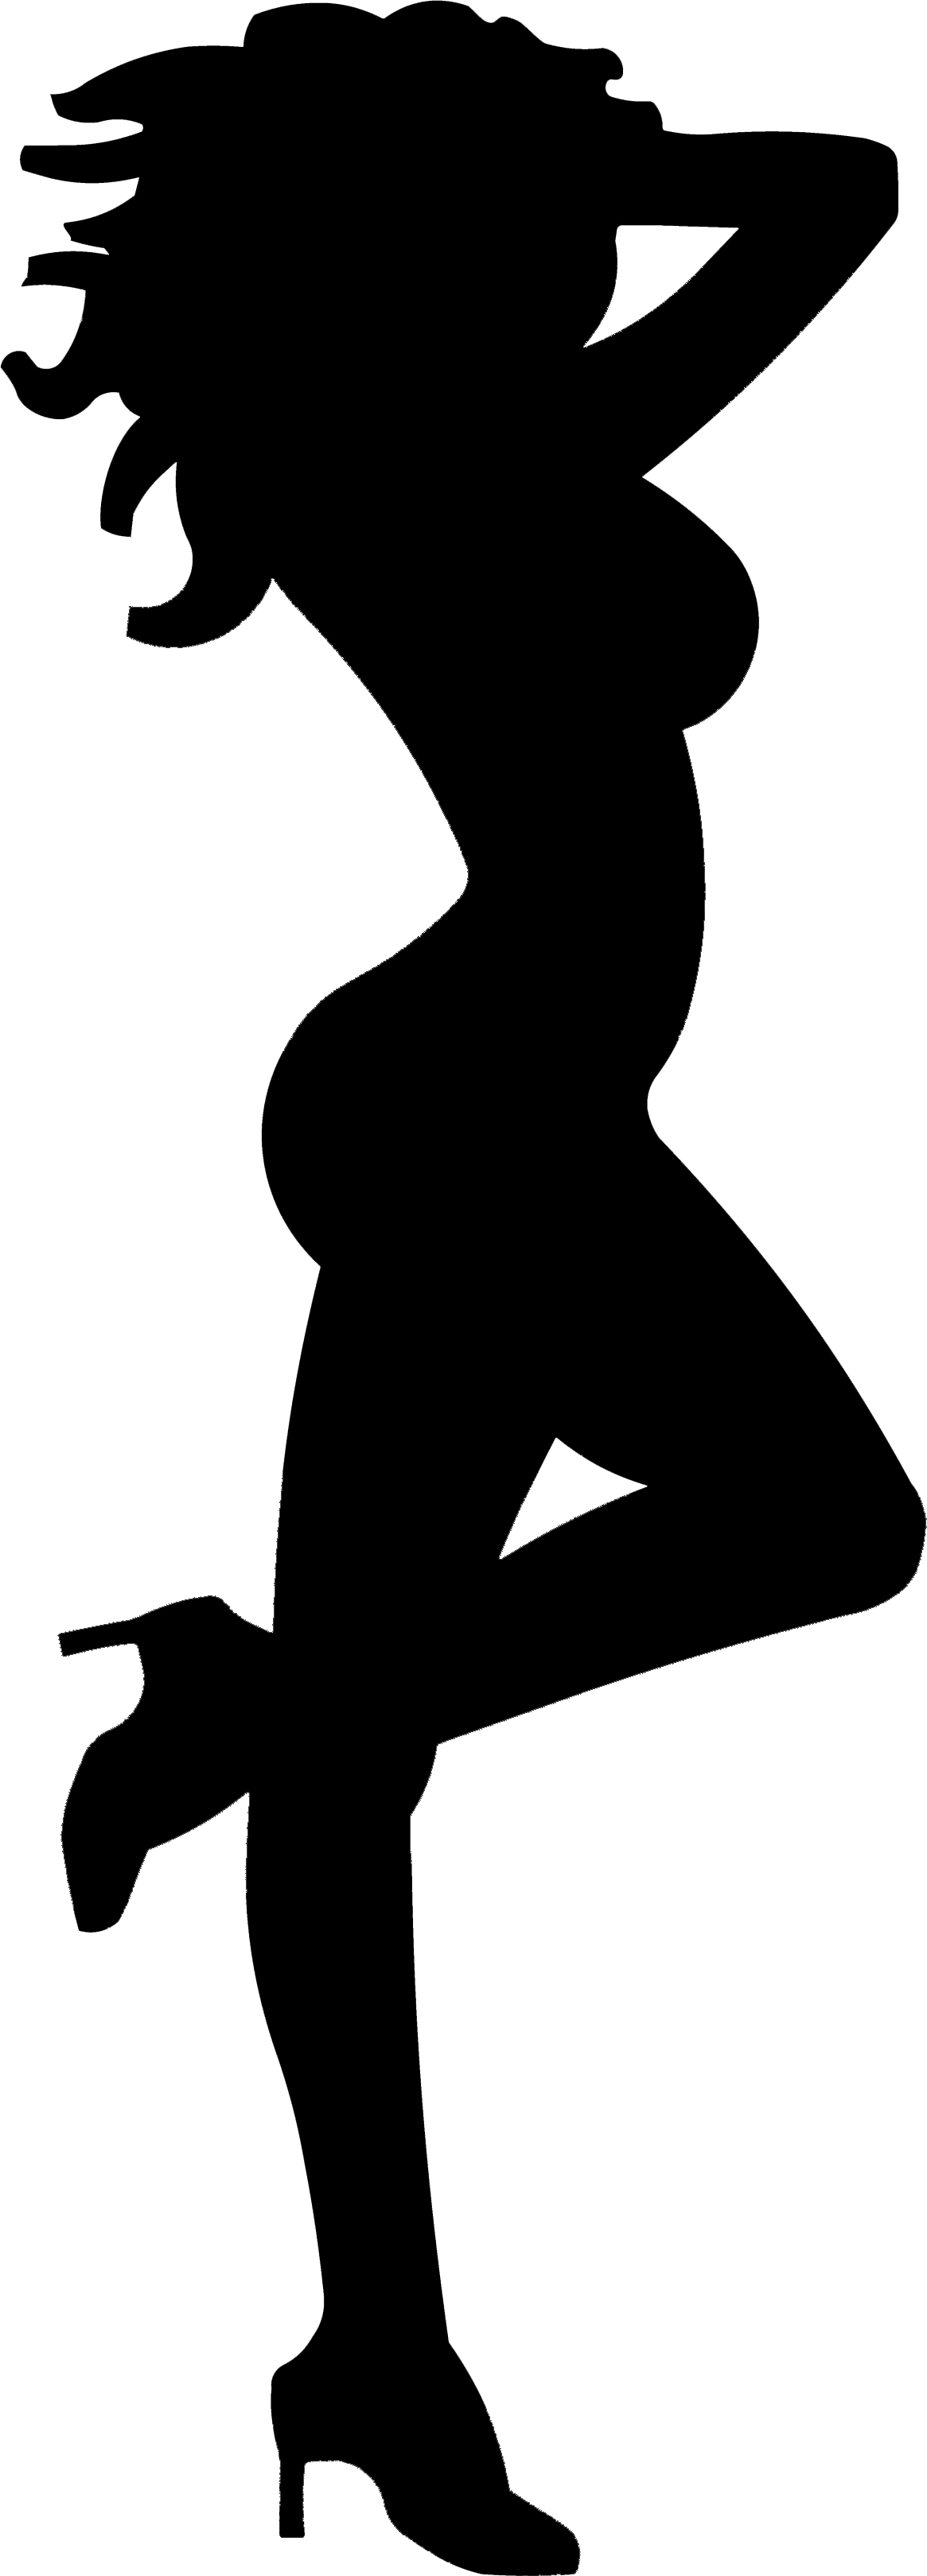 Waitress clipart silhouette. Barista at getdrawings com